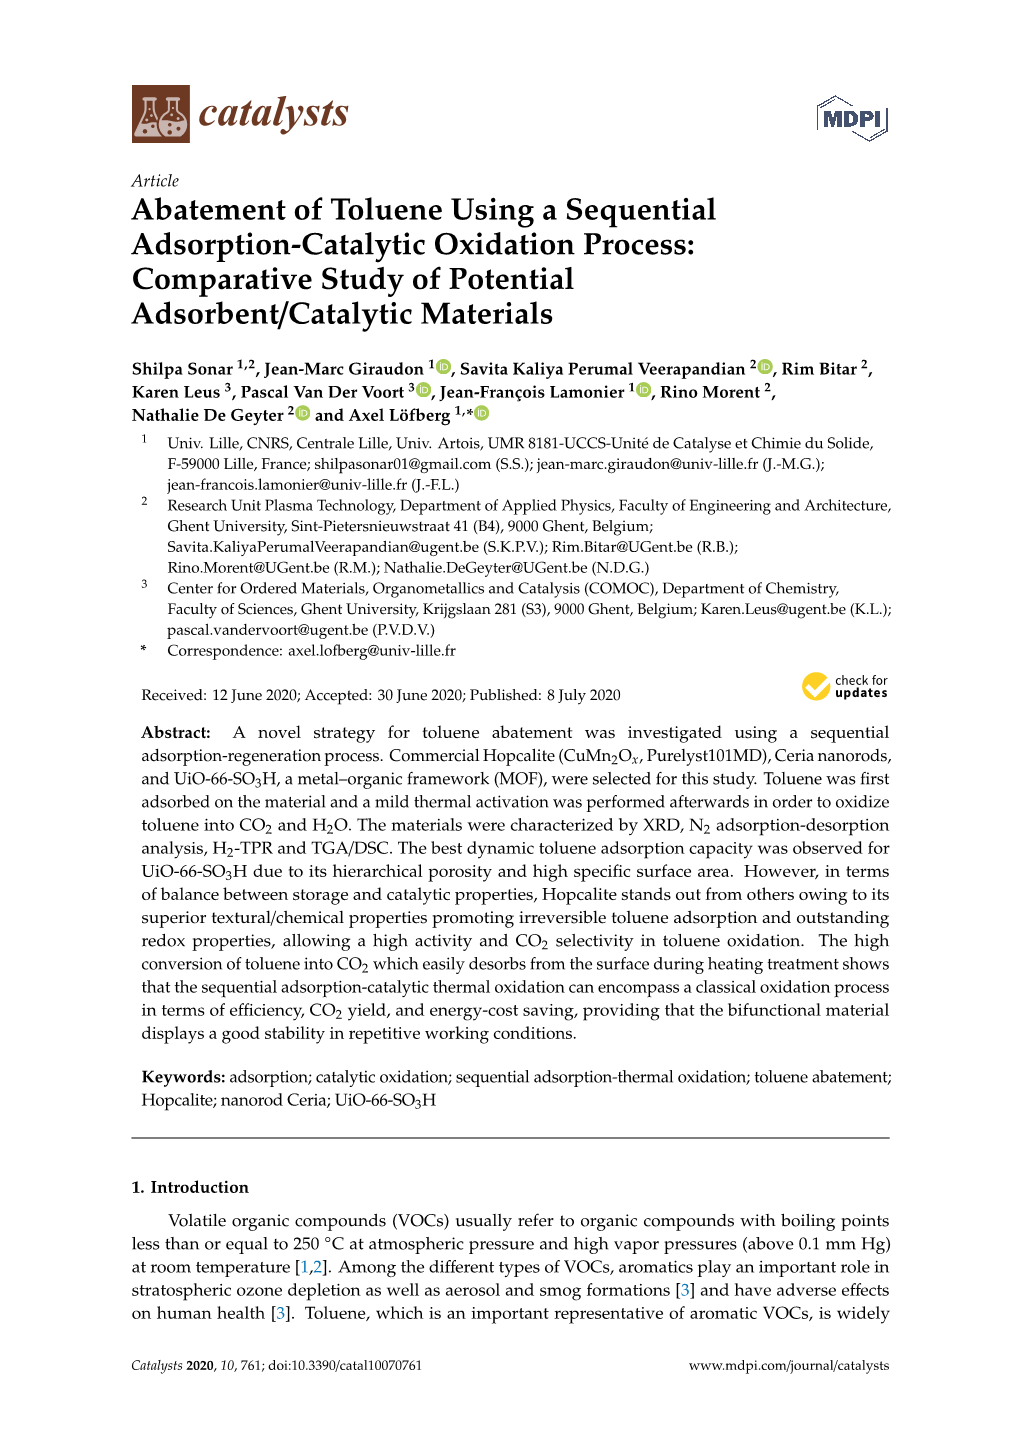 Abatement of Toluene Using a Sequential Adsorption-Catalytic Oxidation Process: Comparative Study of Potential Adsorbent/Catalytic Materials